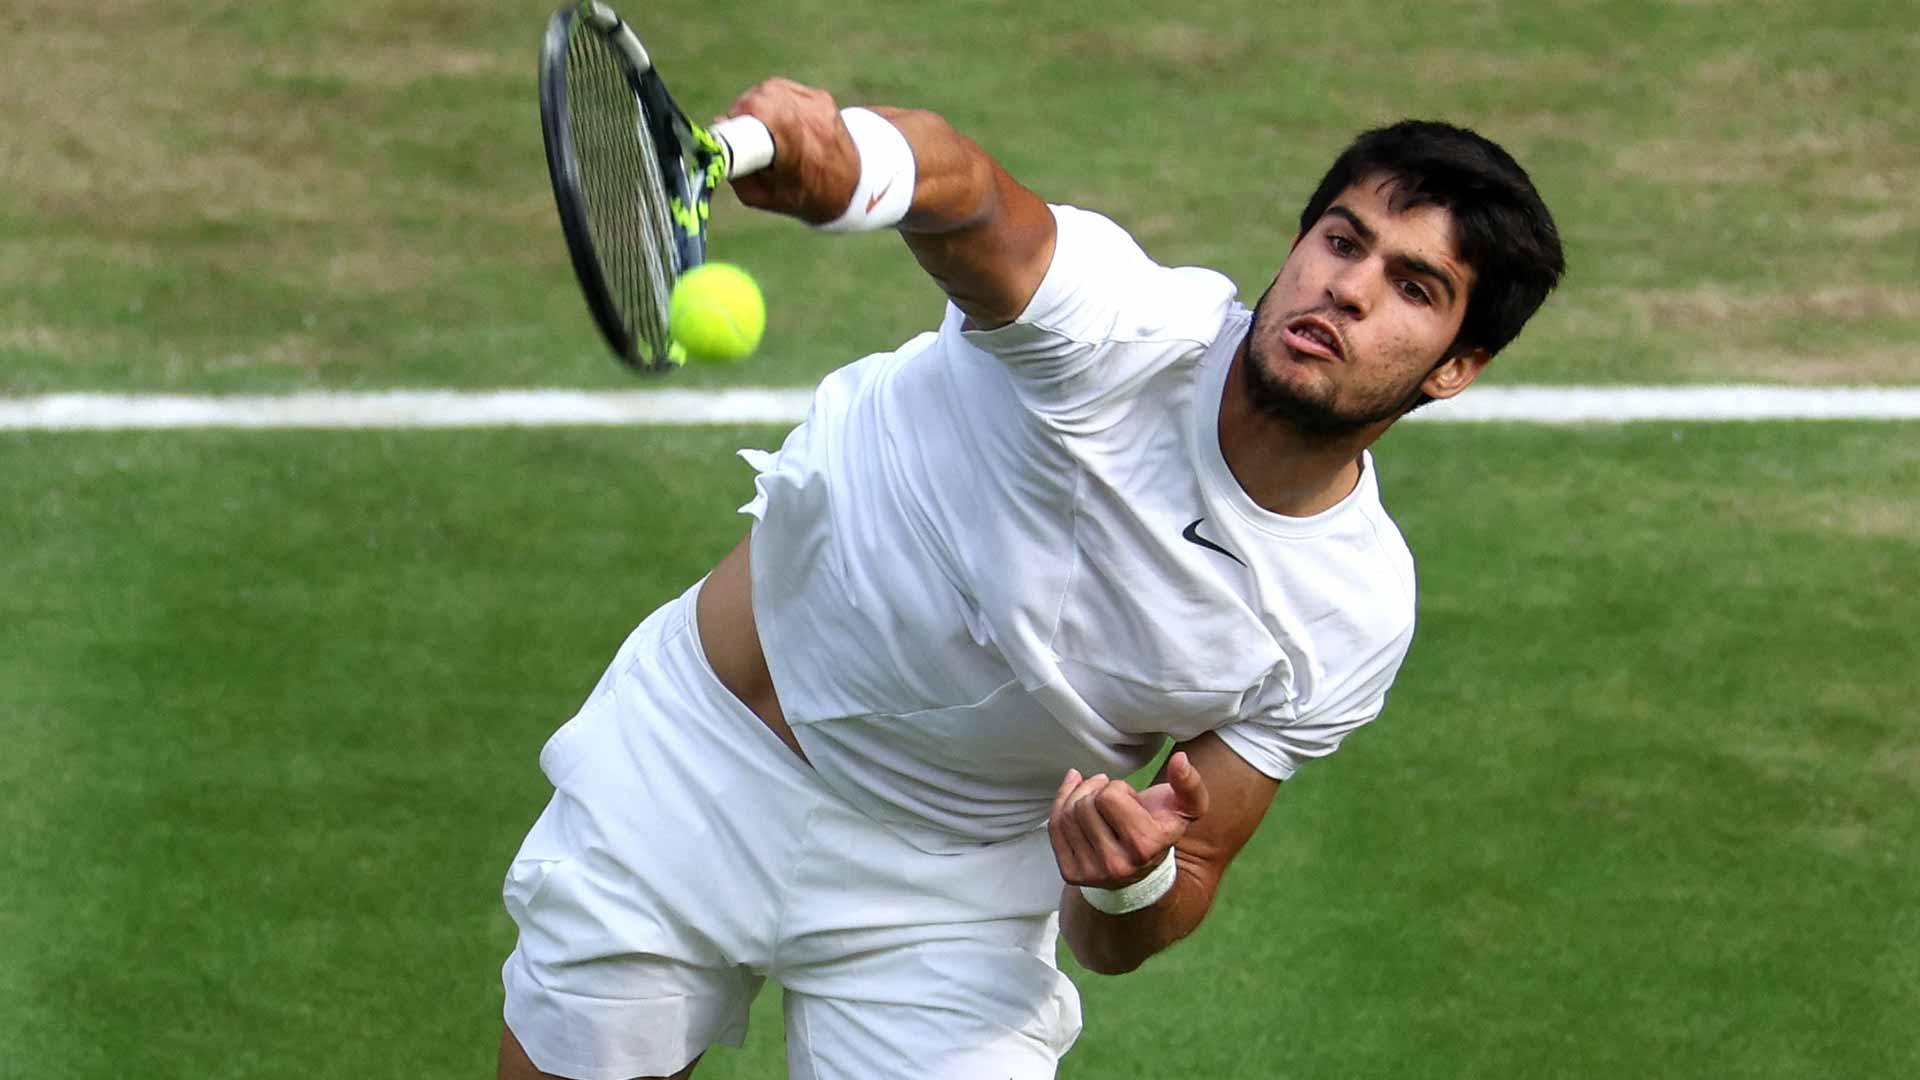 Carlos Alcaraz defeats Novak Djokovic in five sets to win the Wimbledon title and retain World No. 1 in the Pepperstone ATP Rankings.